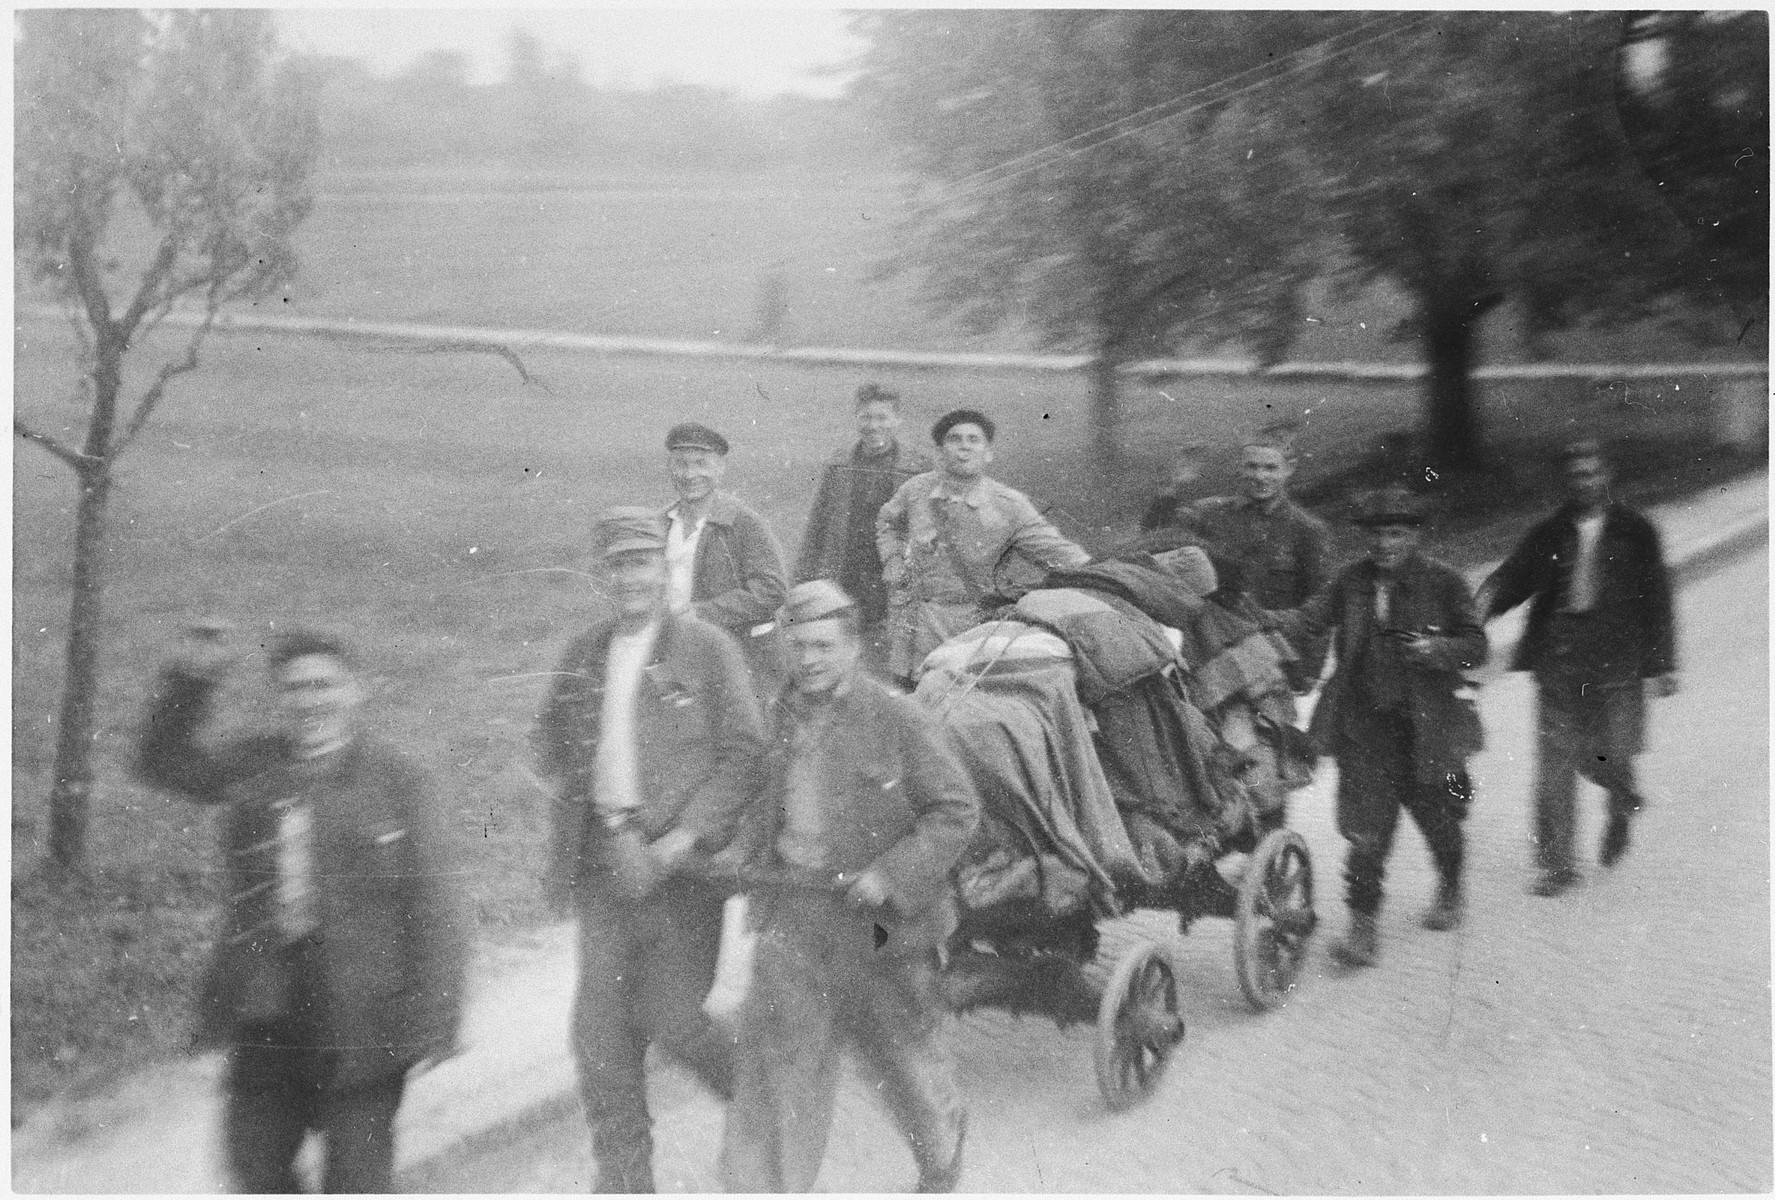 Jubilant survivors of the Ebensee sub-camp leave the camp with their few belongings.

The original caption reads: "Forced laborers going home."